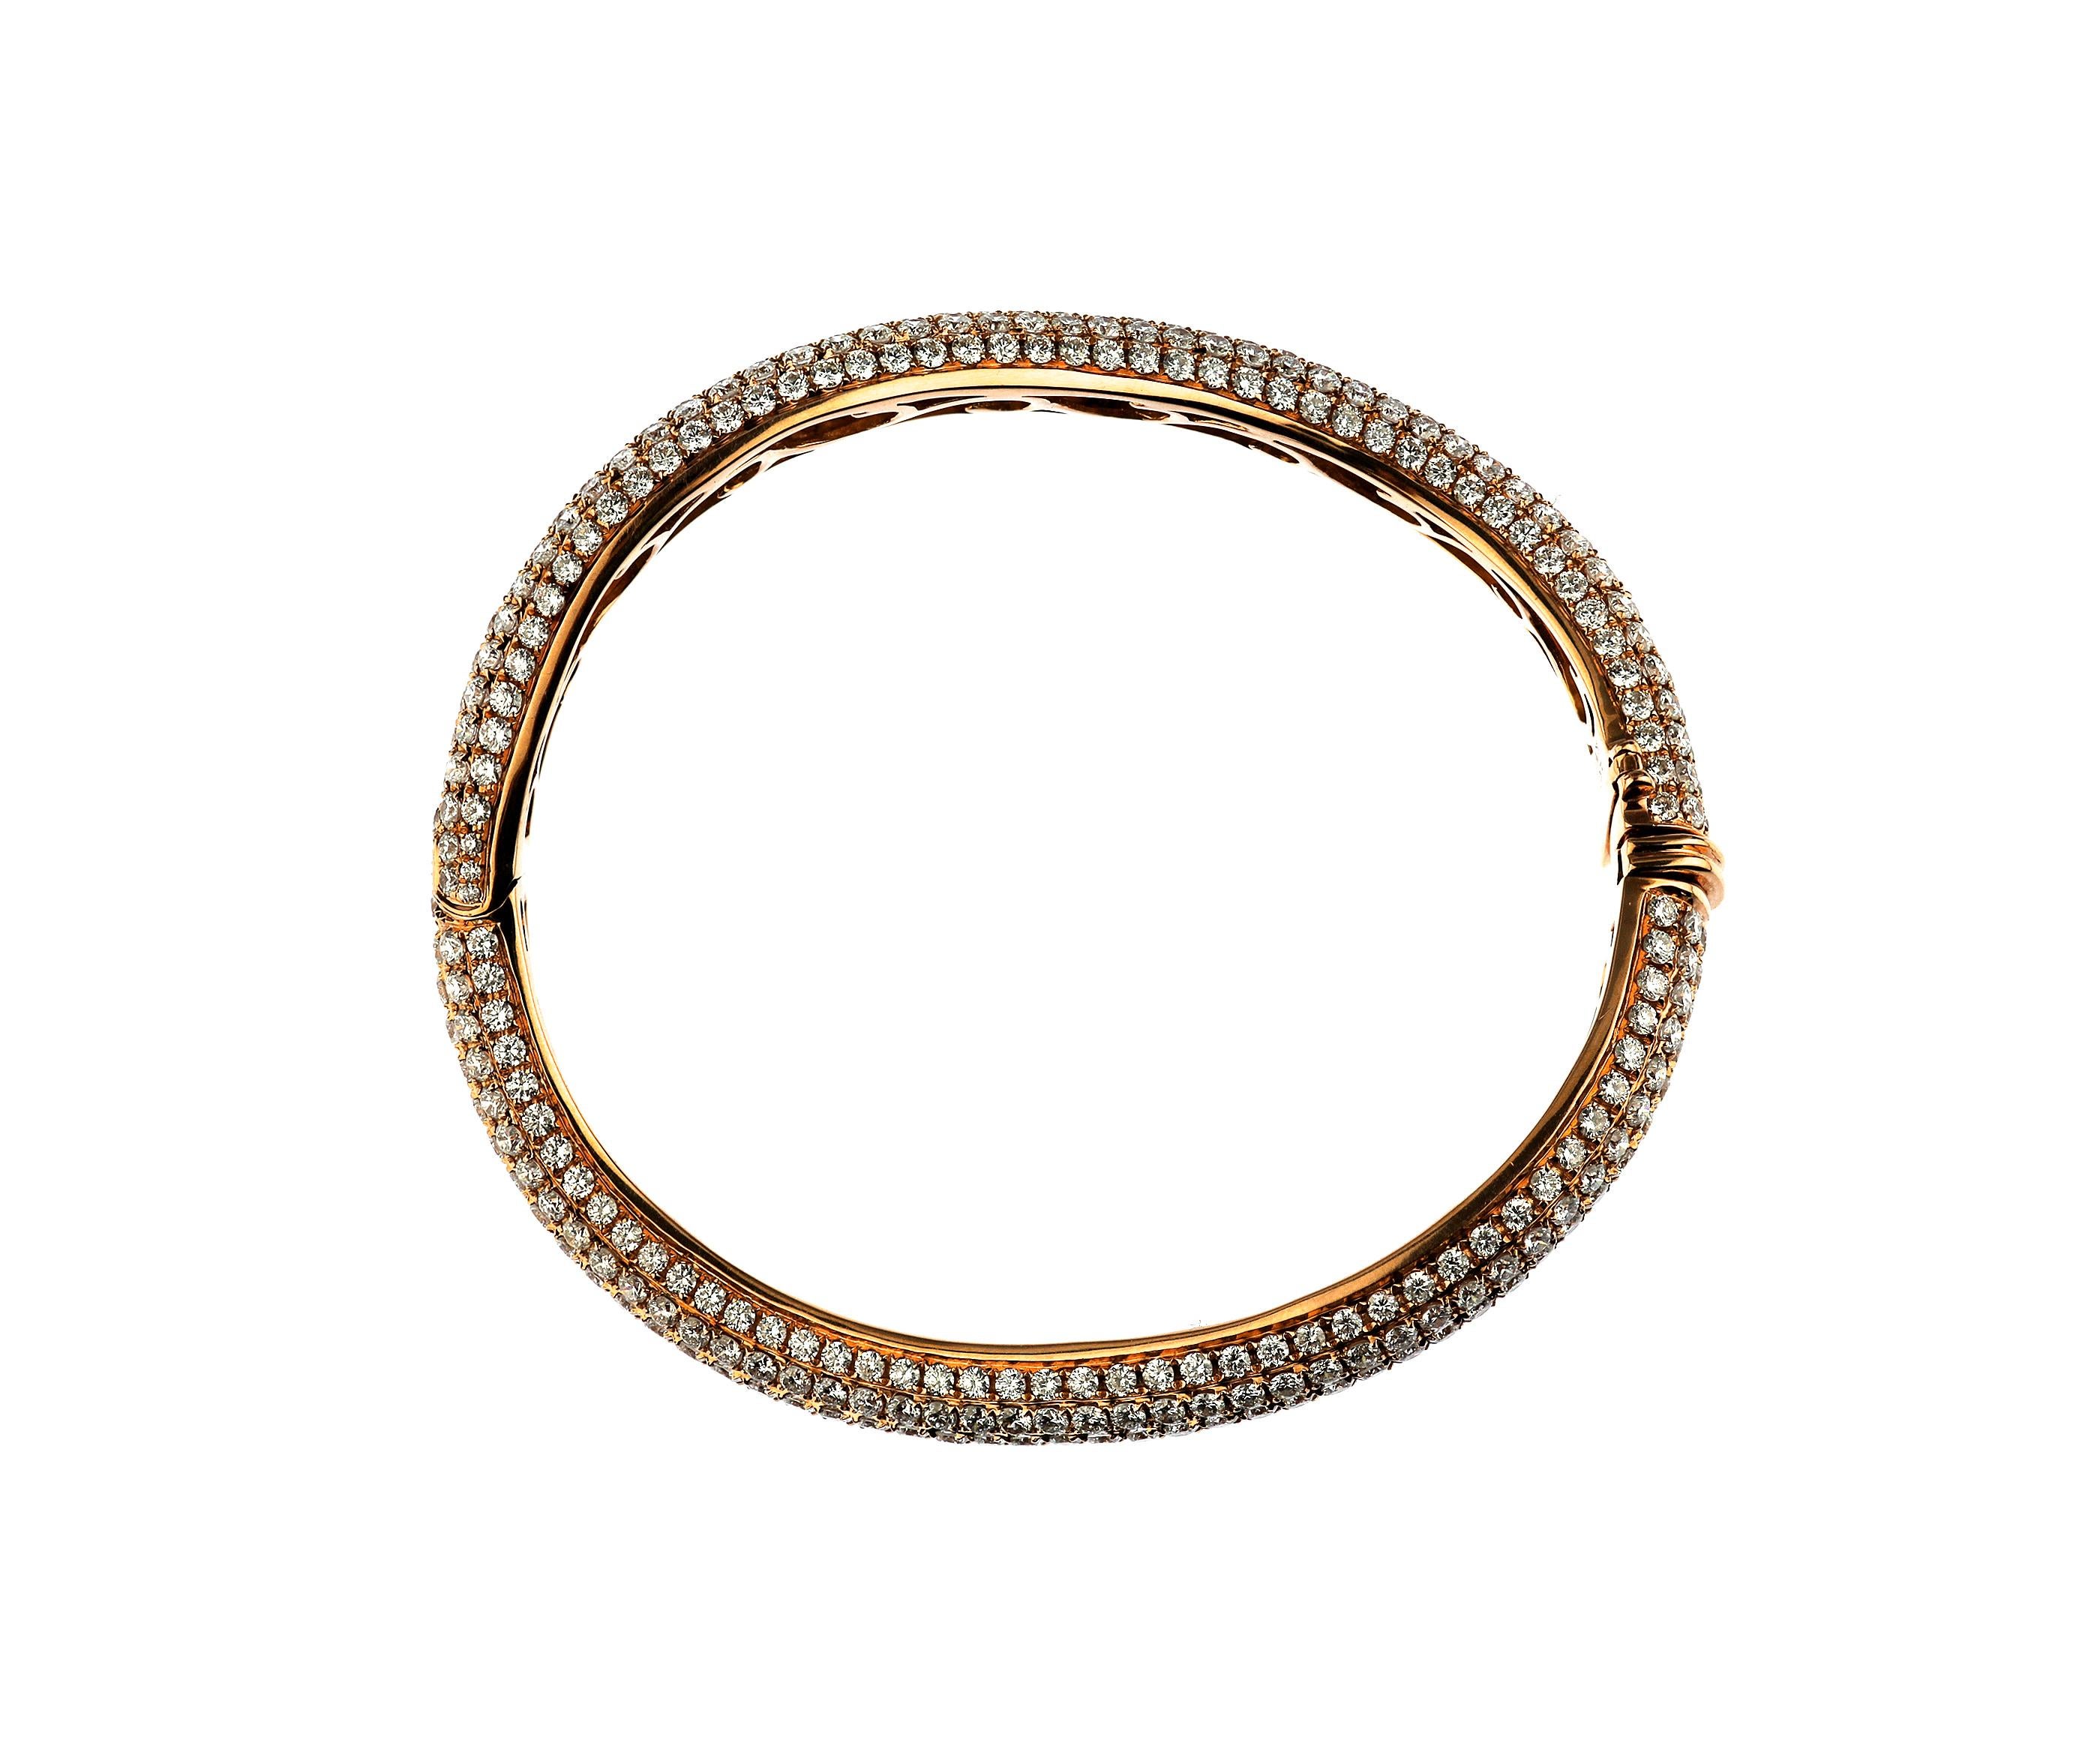 Round Cut 5 Row Pave Diamond Bangle of 9.7cts set in 18ct Rose Gold For Sale